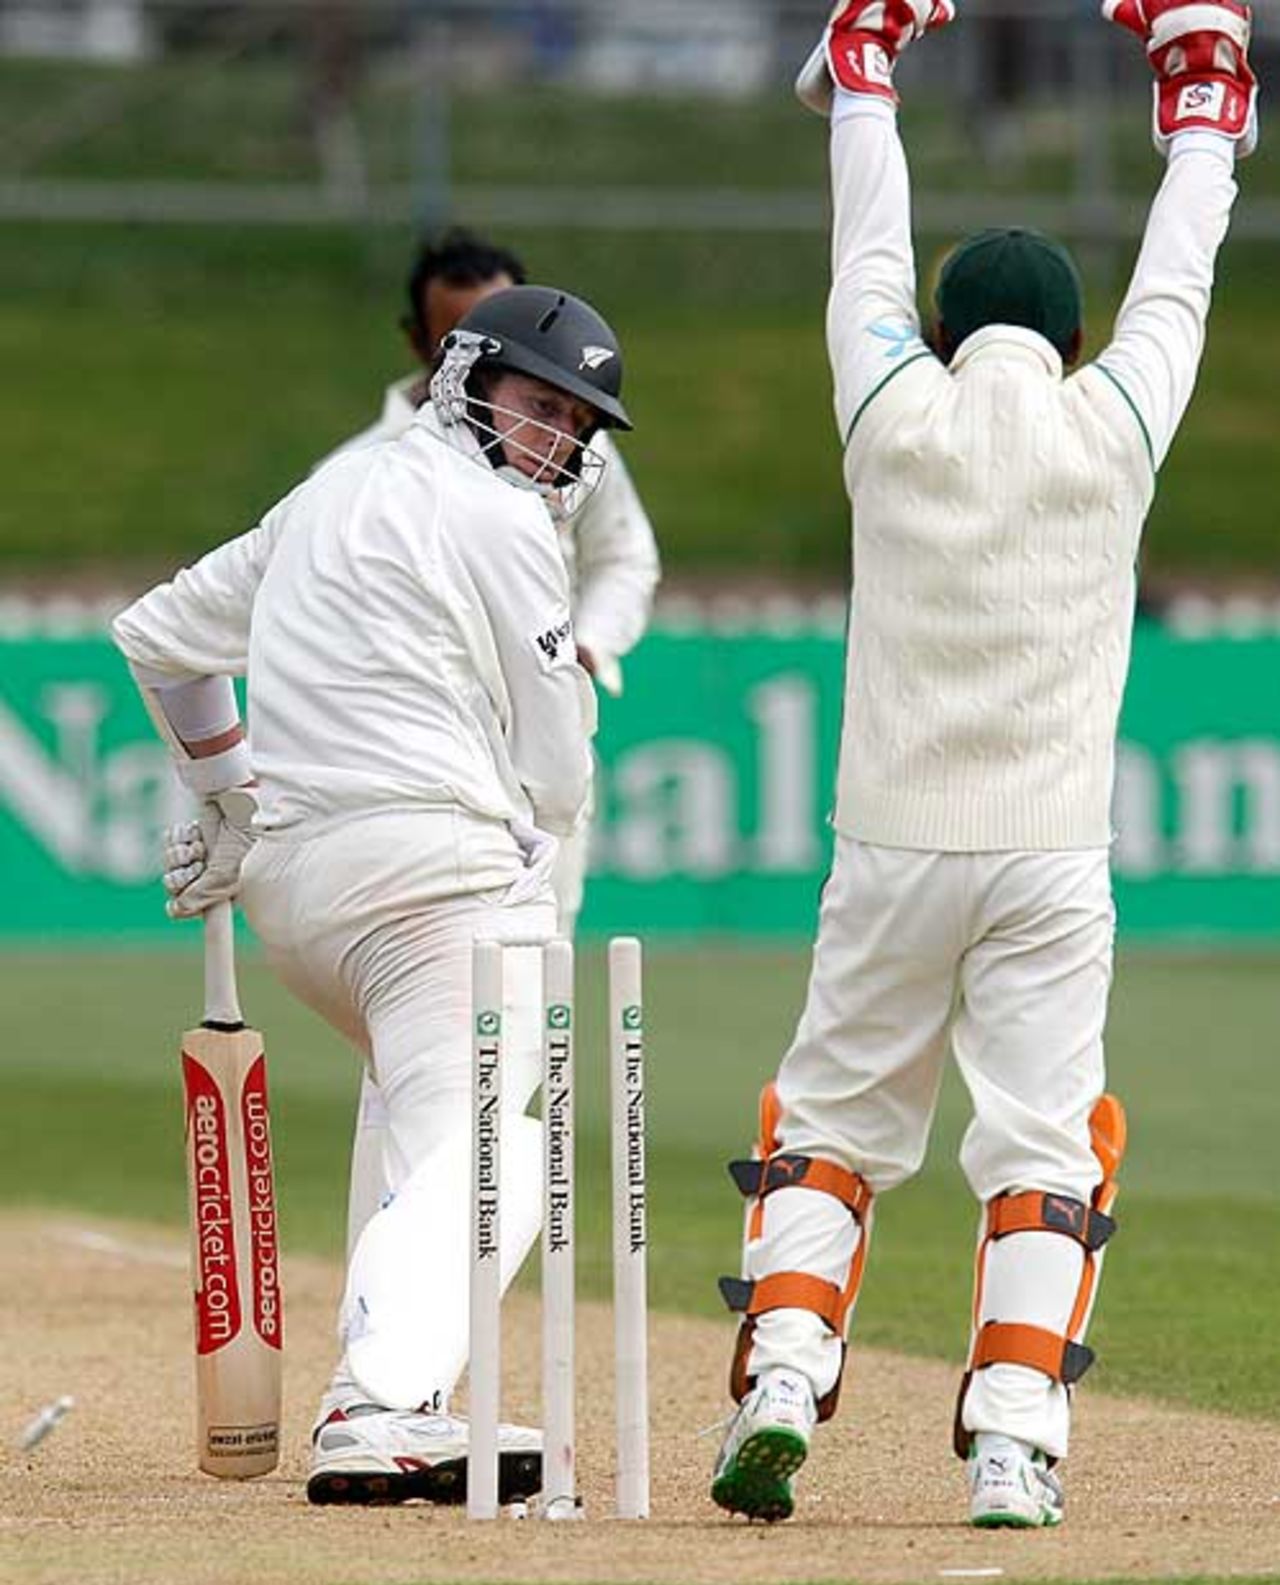 Iain O'Brien's off bail is dislodged by Aftab Ahmed, New Zealand v Bangladesh, 2nd Test, Wellington, 2nd day, January 13, 2008